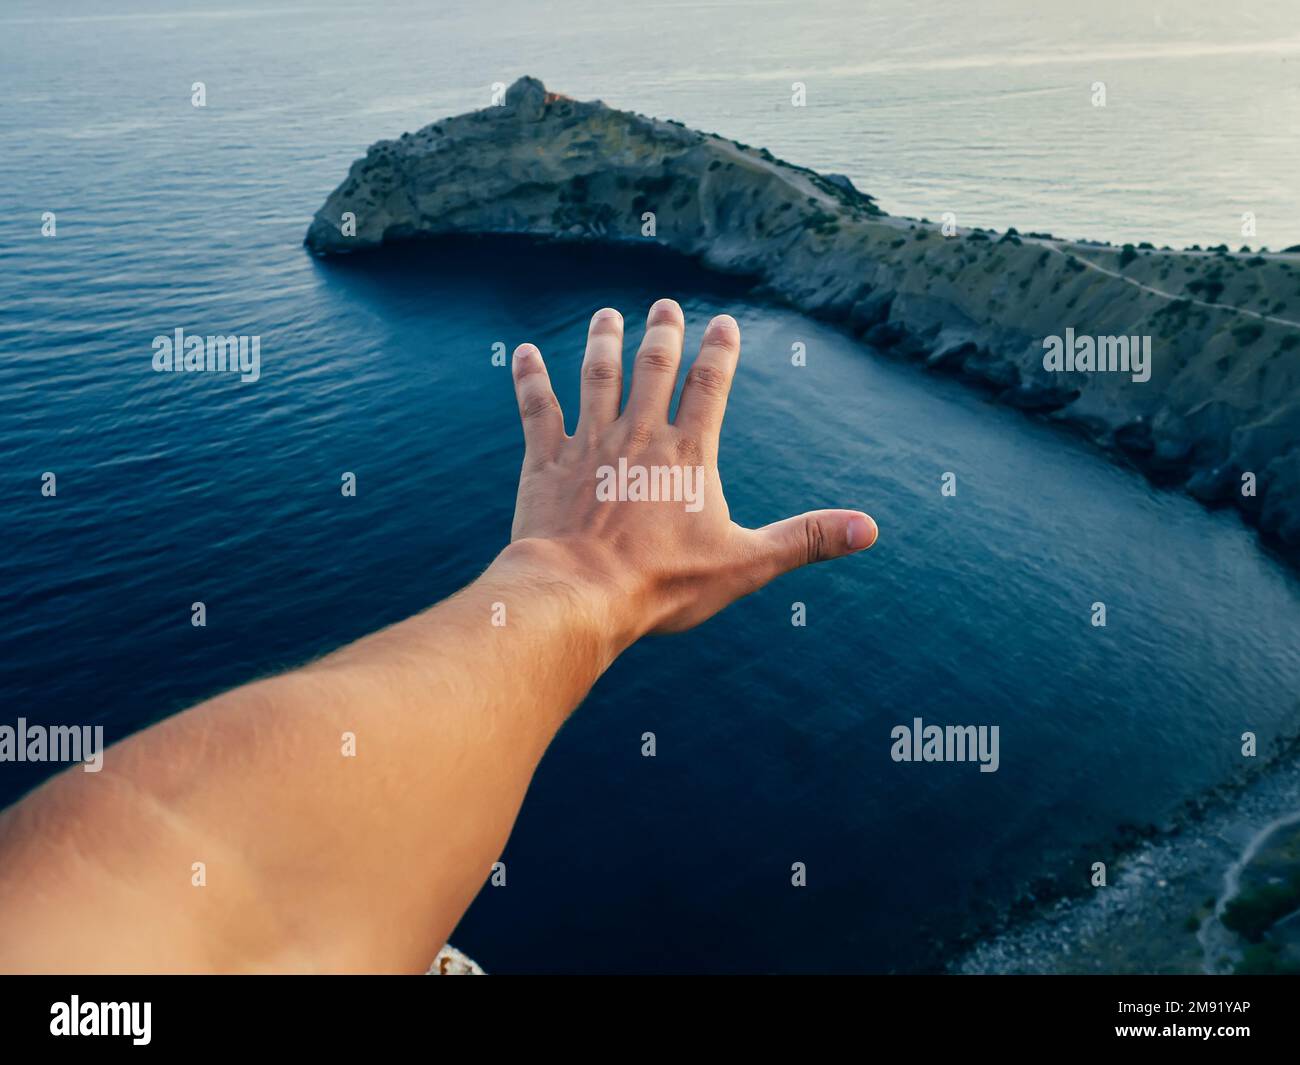 hand of a male tourist on the background of the sea. Symbolizes freedom, unity and protection of nature Stock Photo